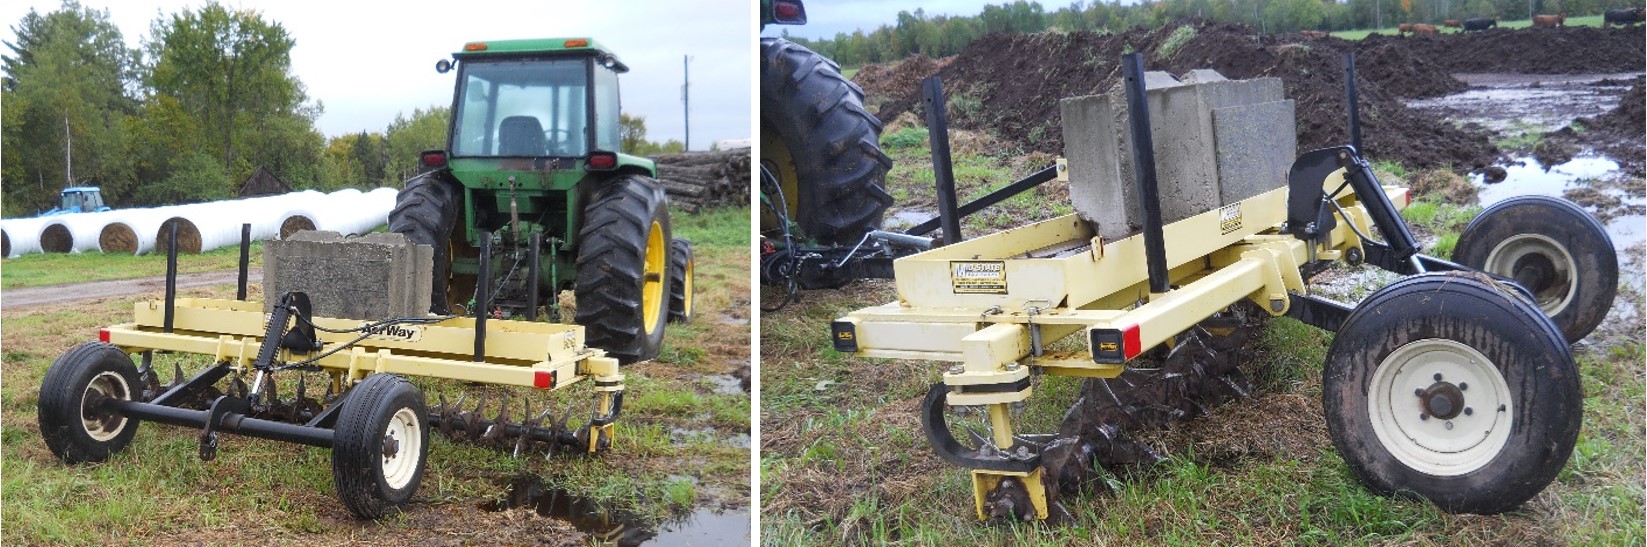 Two pictures showing soil tillage equipment.